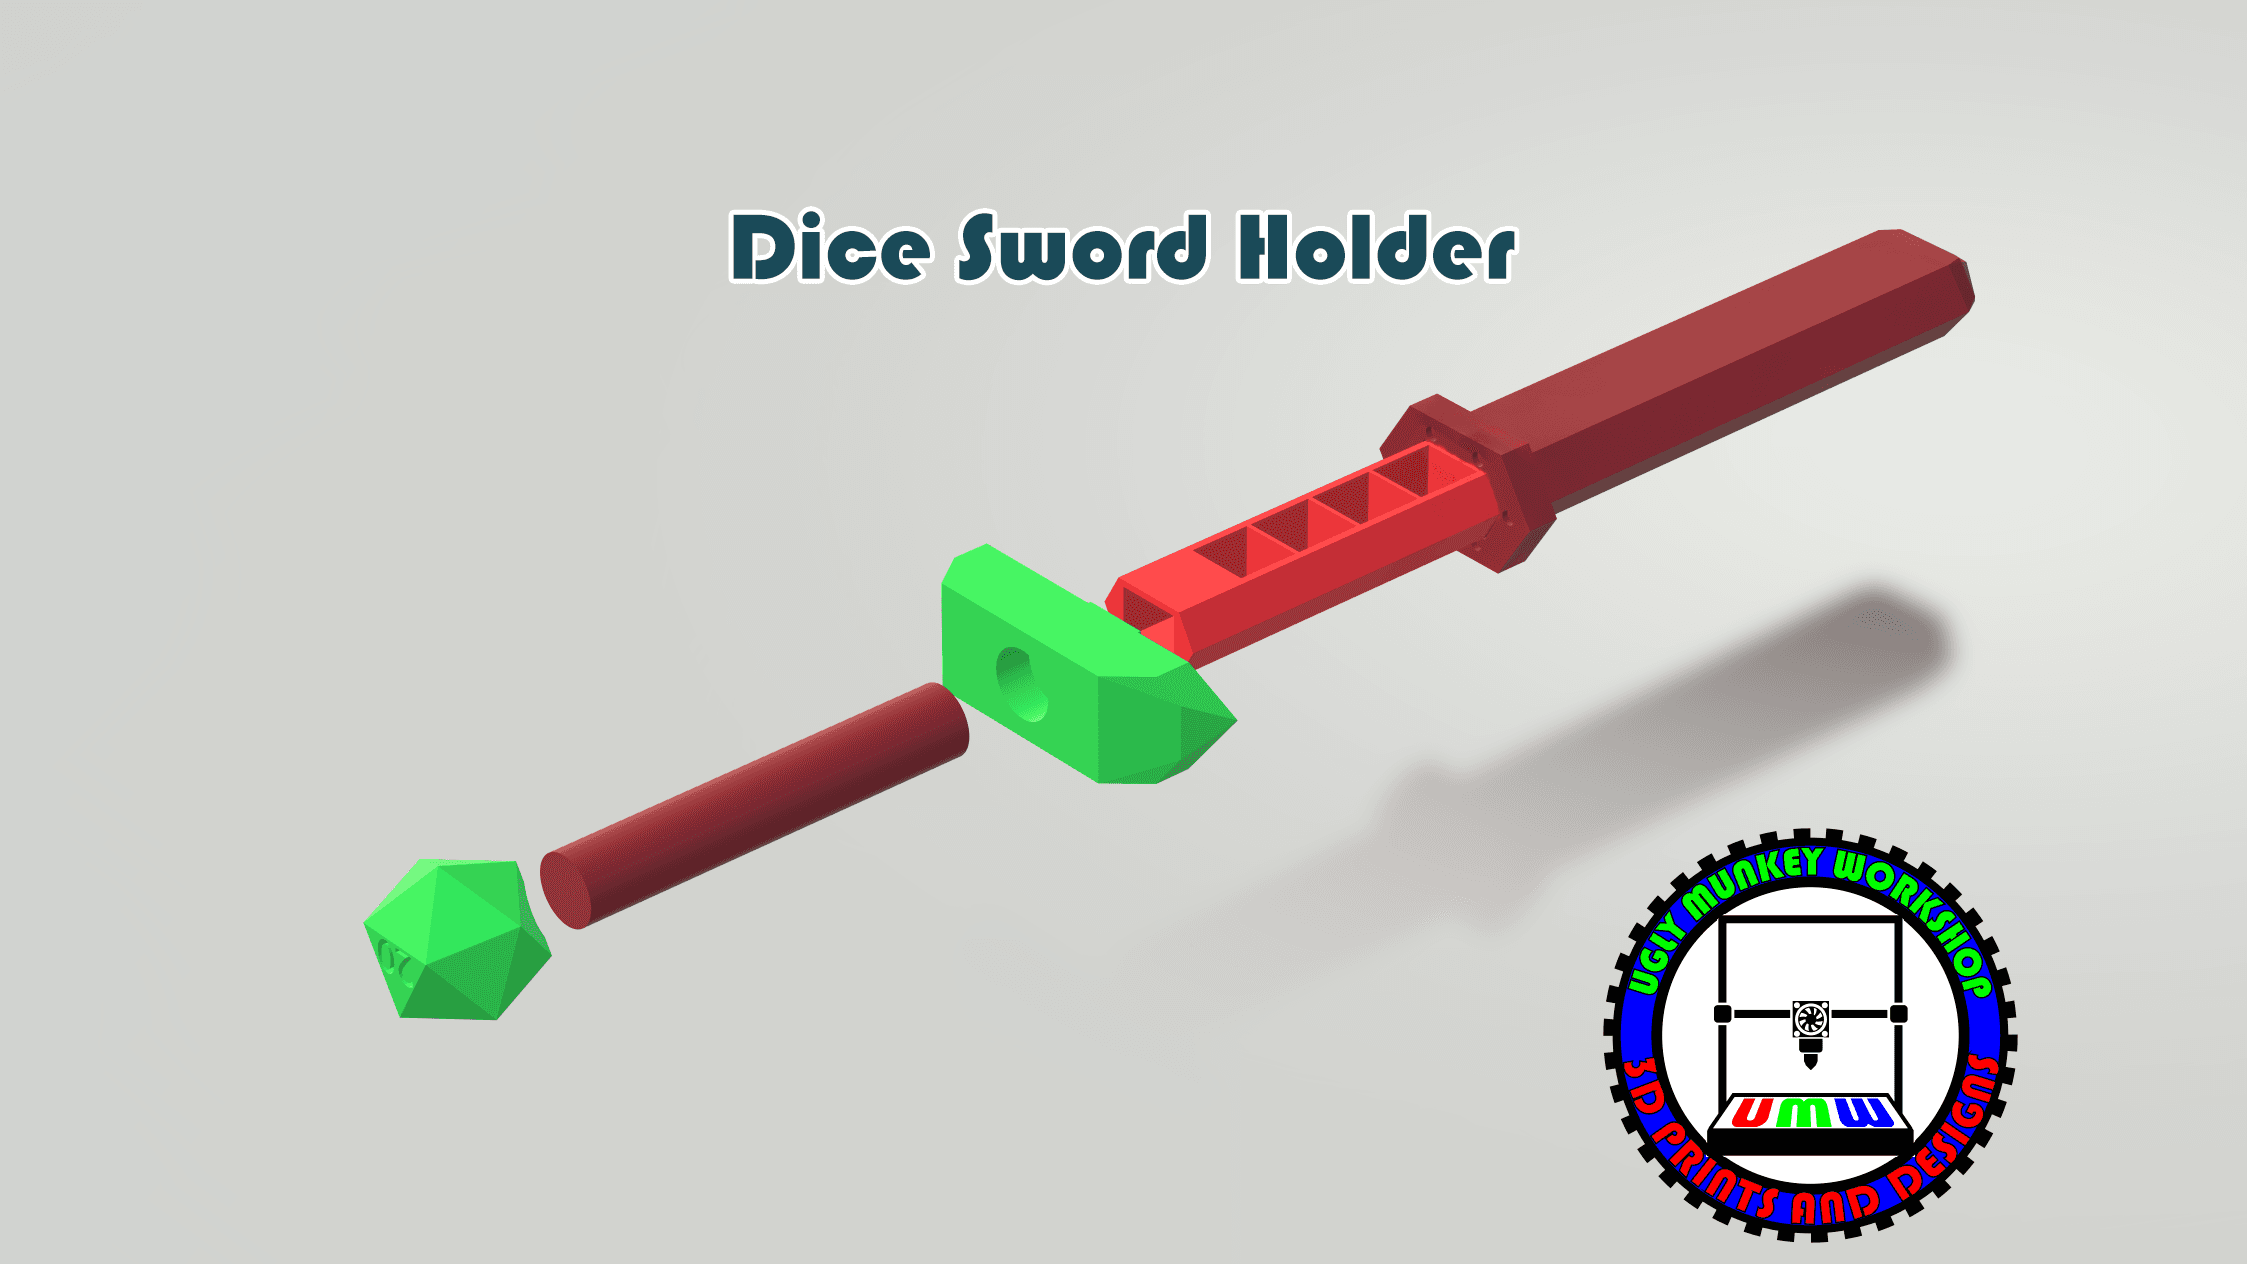 S.W.O.R.D. - Dice Sword Holder - Strategic Weapon Organizer for Rolling Dice - No Supports 3d model